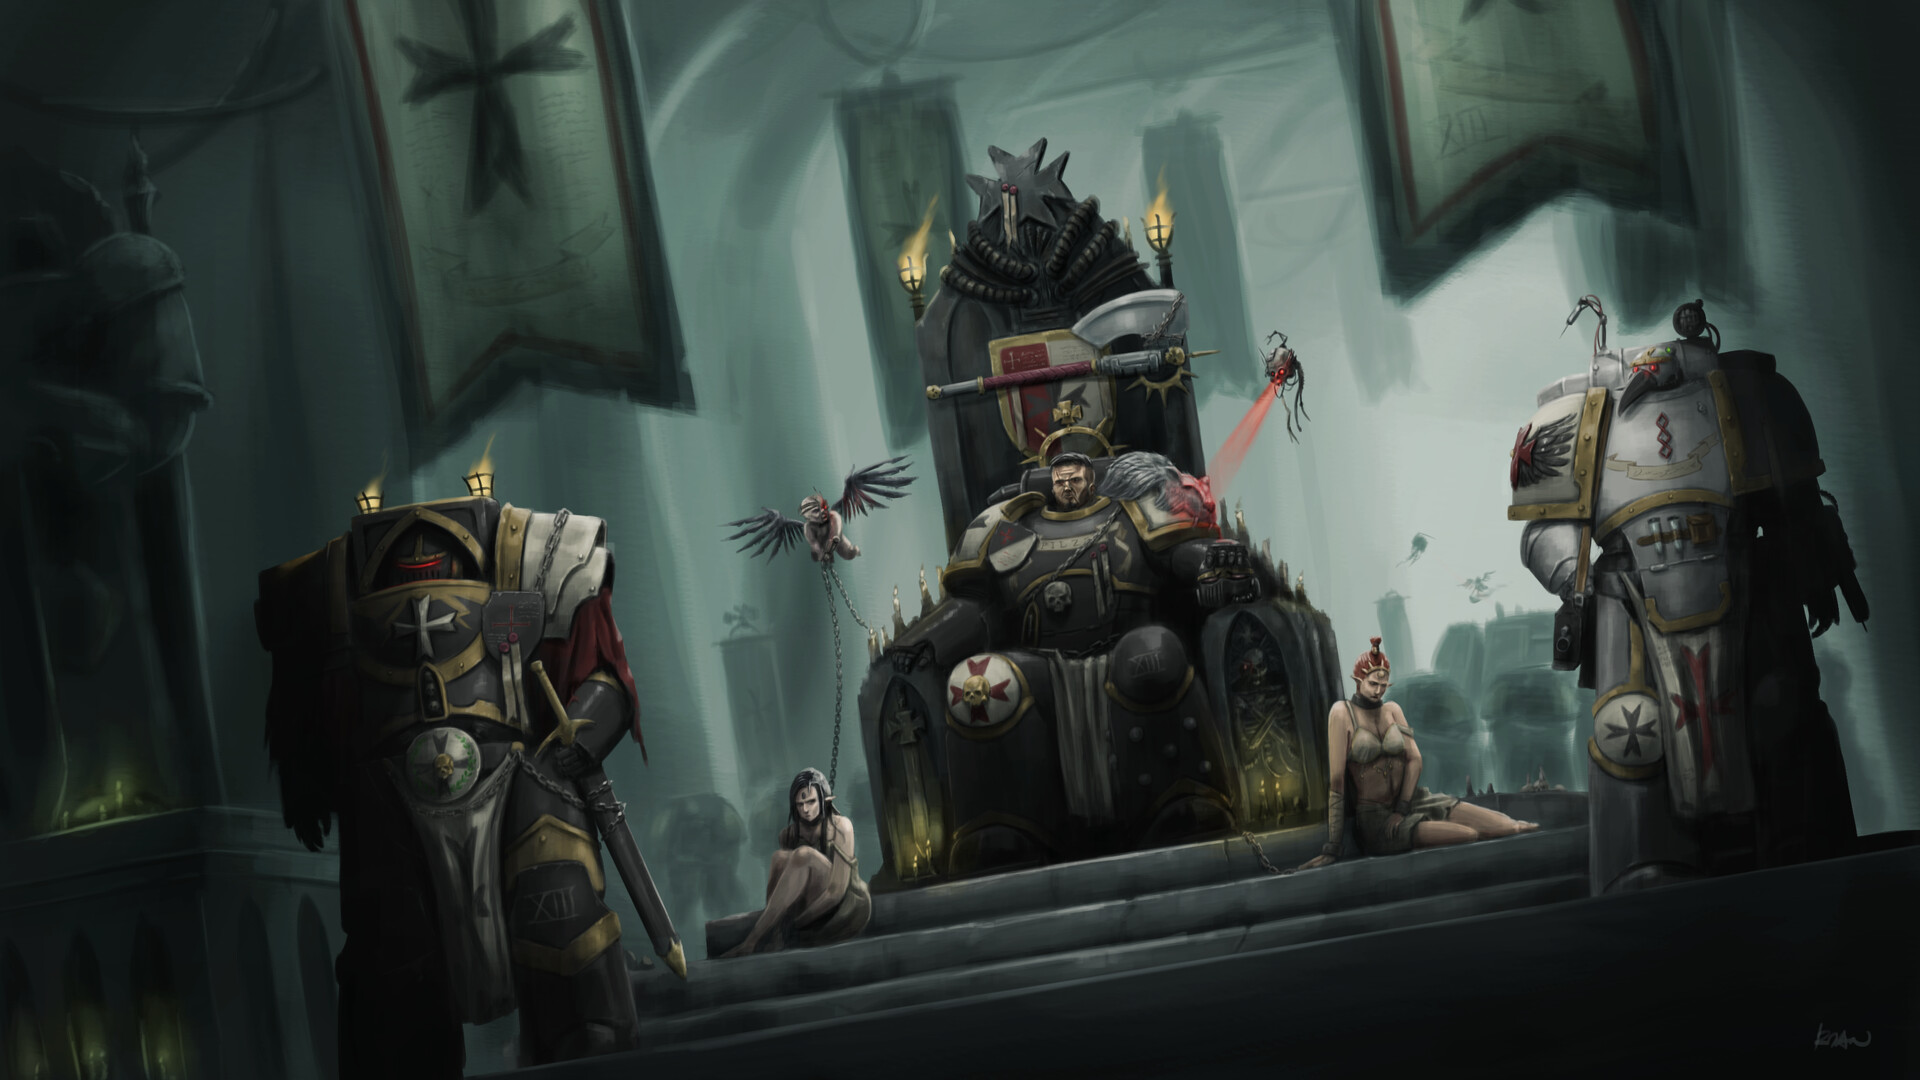 Science Fiction Warhammer 40 000 Power Armor Space Marines War Axe Fire Throne Crusaders Slave Skull 1920x1080